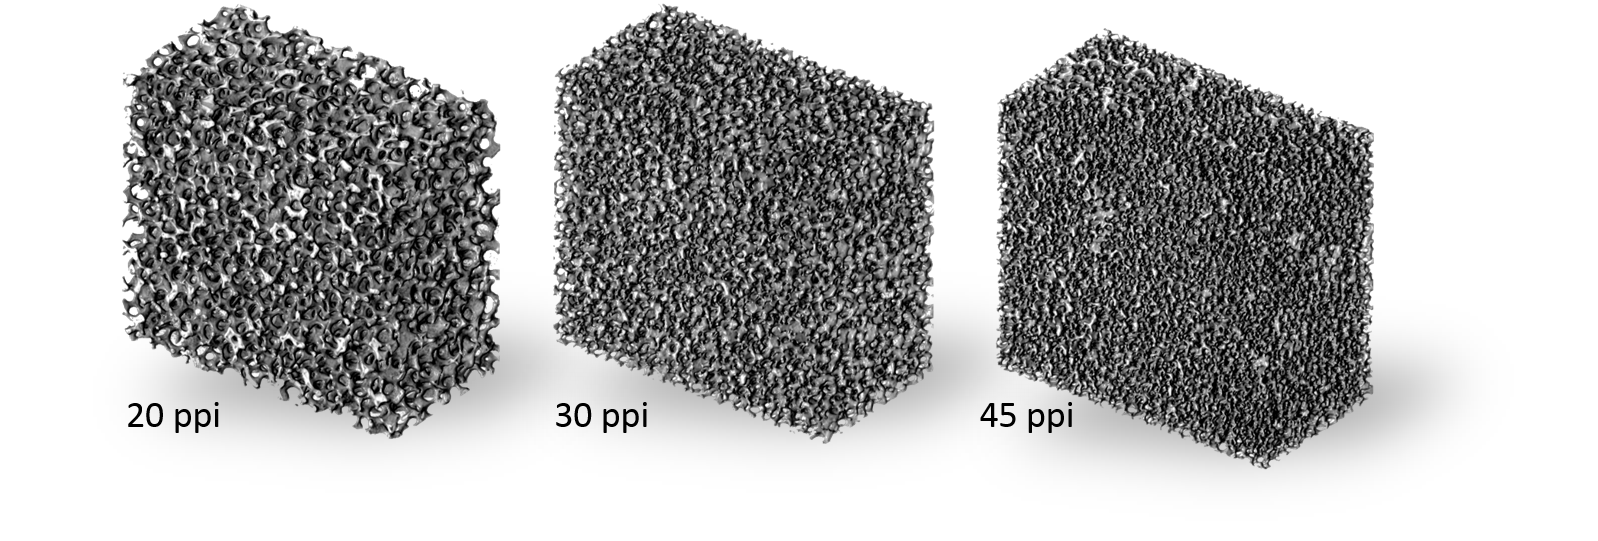 Micro CT images of the applied foams with pore densities of 20 ppi, 30 ppi and 45 ppi